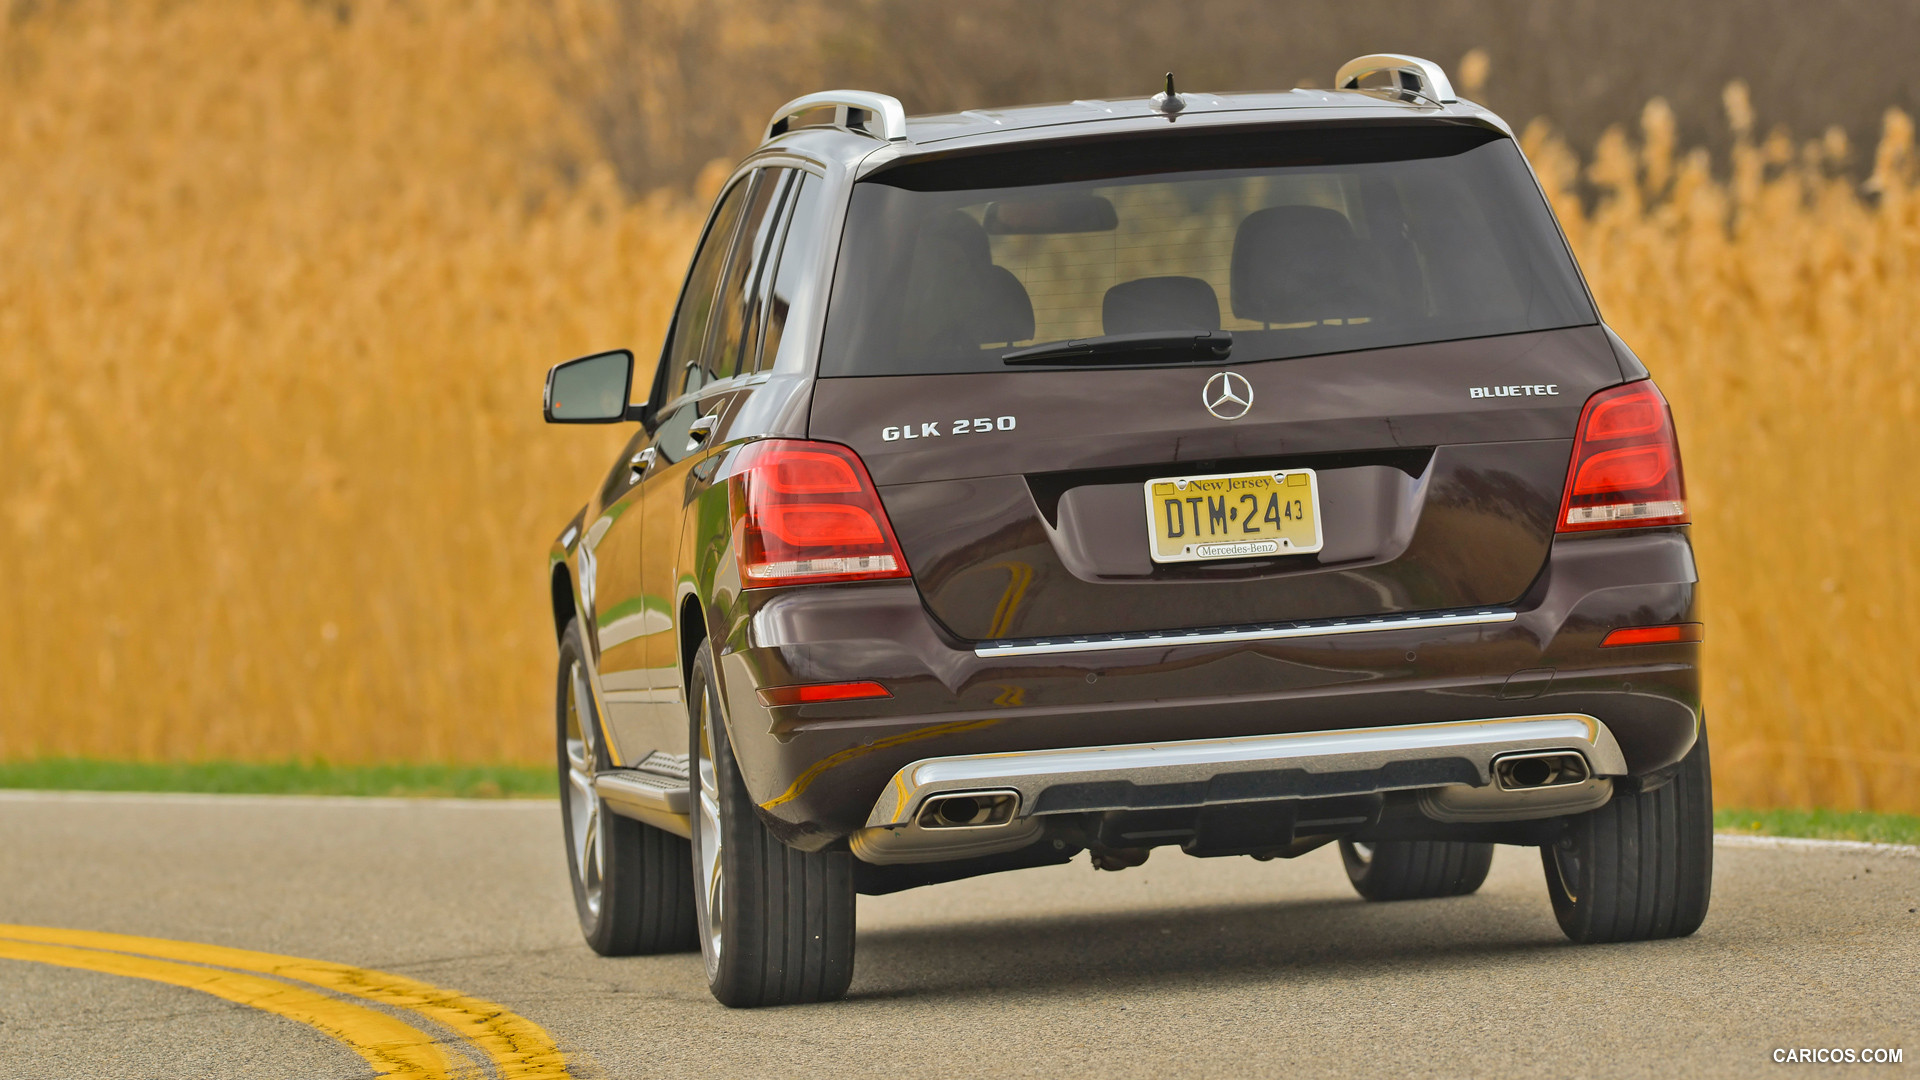 2013 Mercedes-Benz GLK250 BlueTEC (Fully Equipped) - Rear, #59 of 109